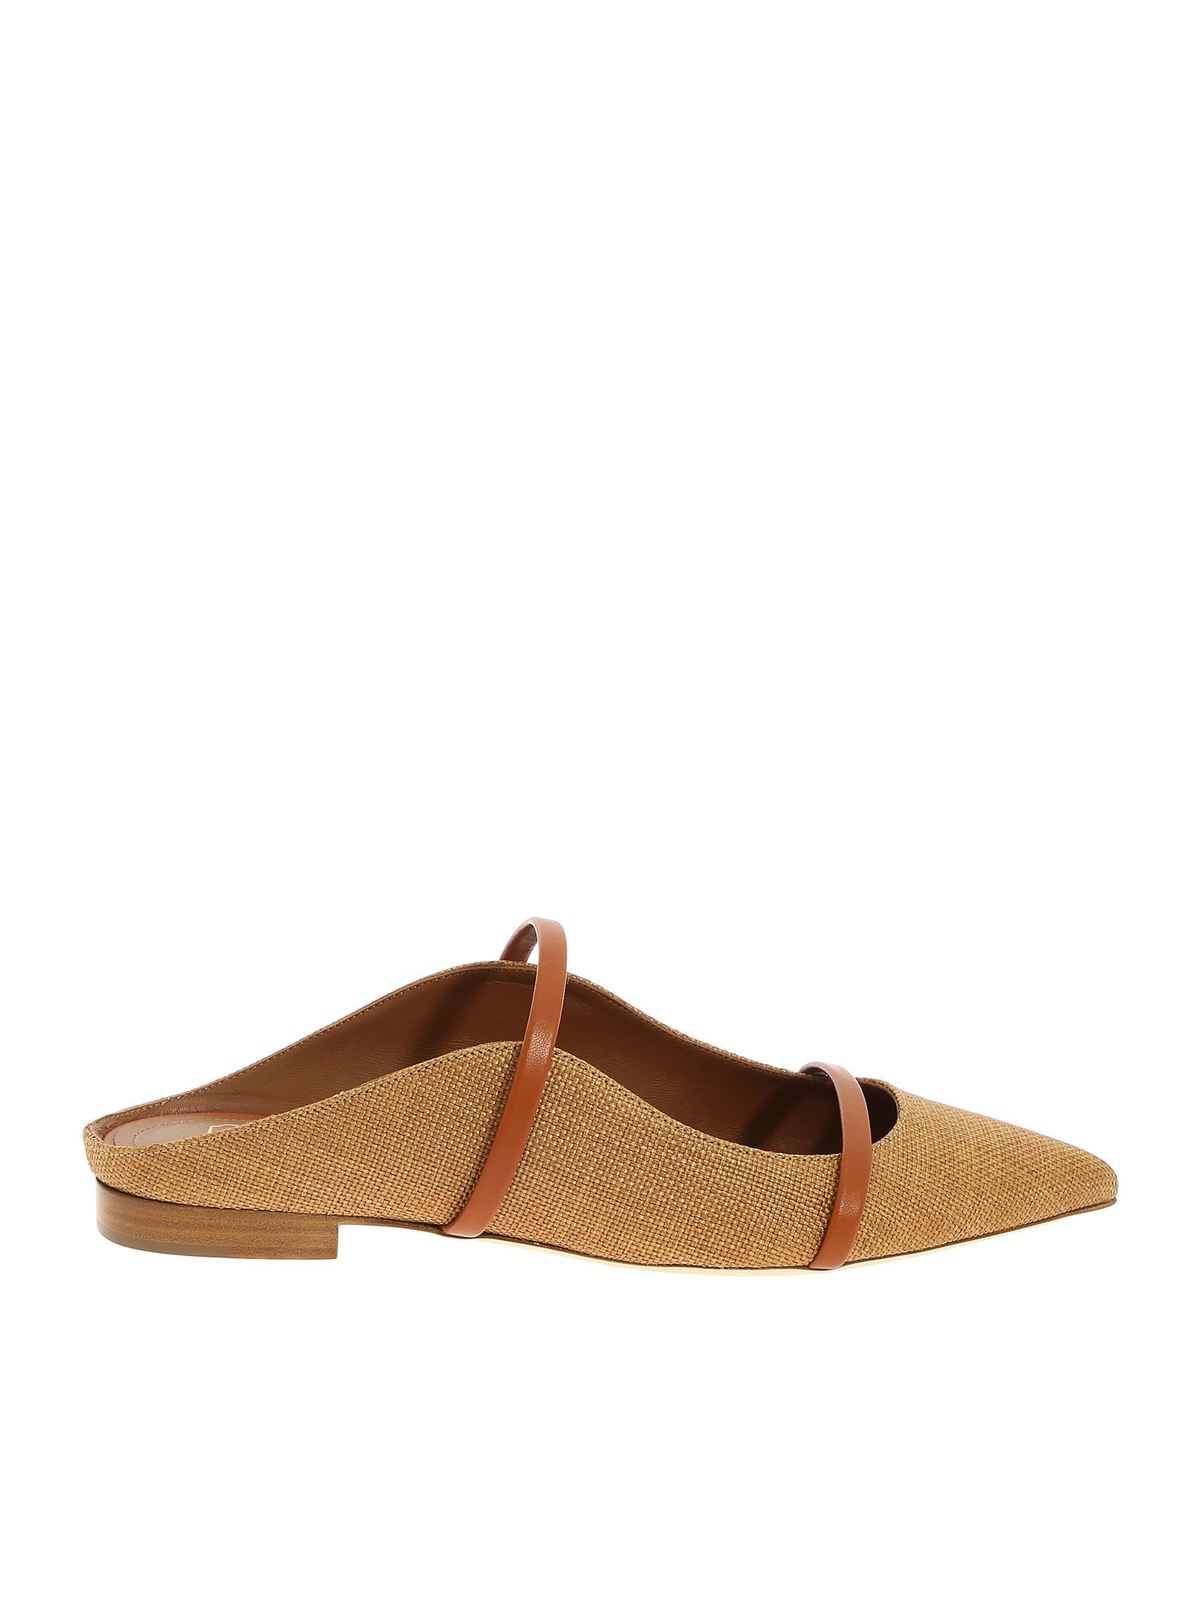 Malone Souliers - Mure Maureen in leather color - mules shoes ...